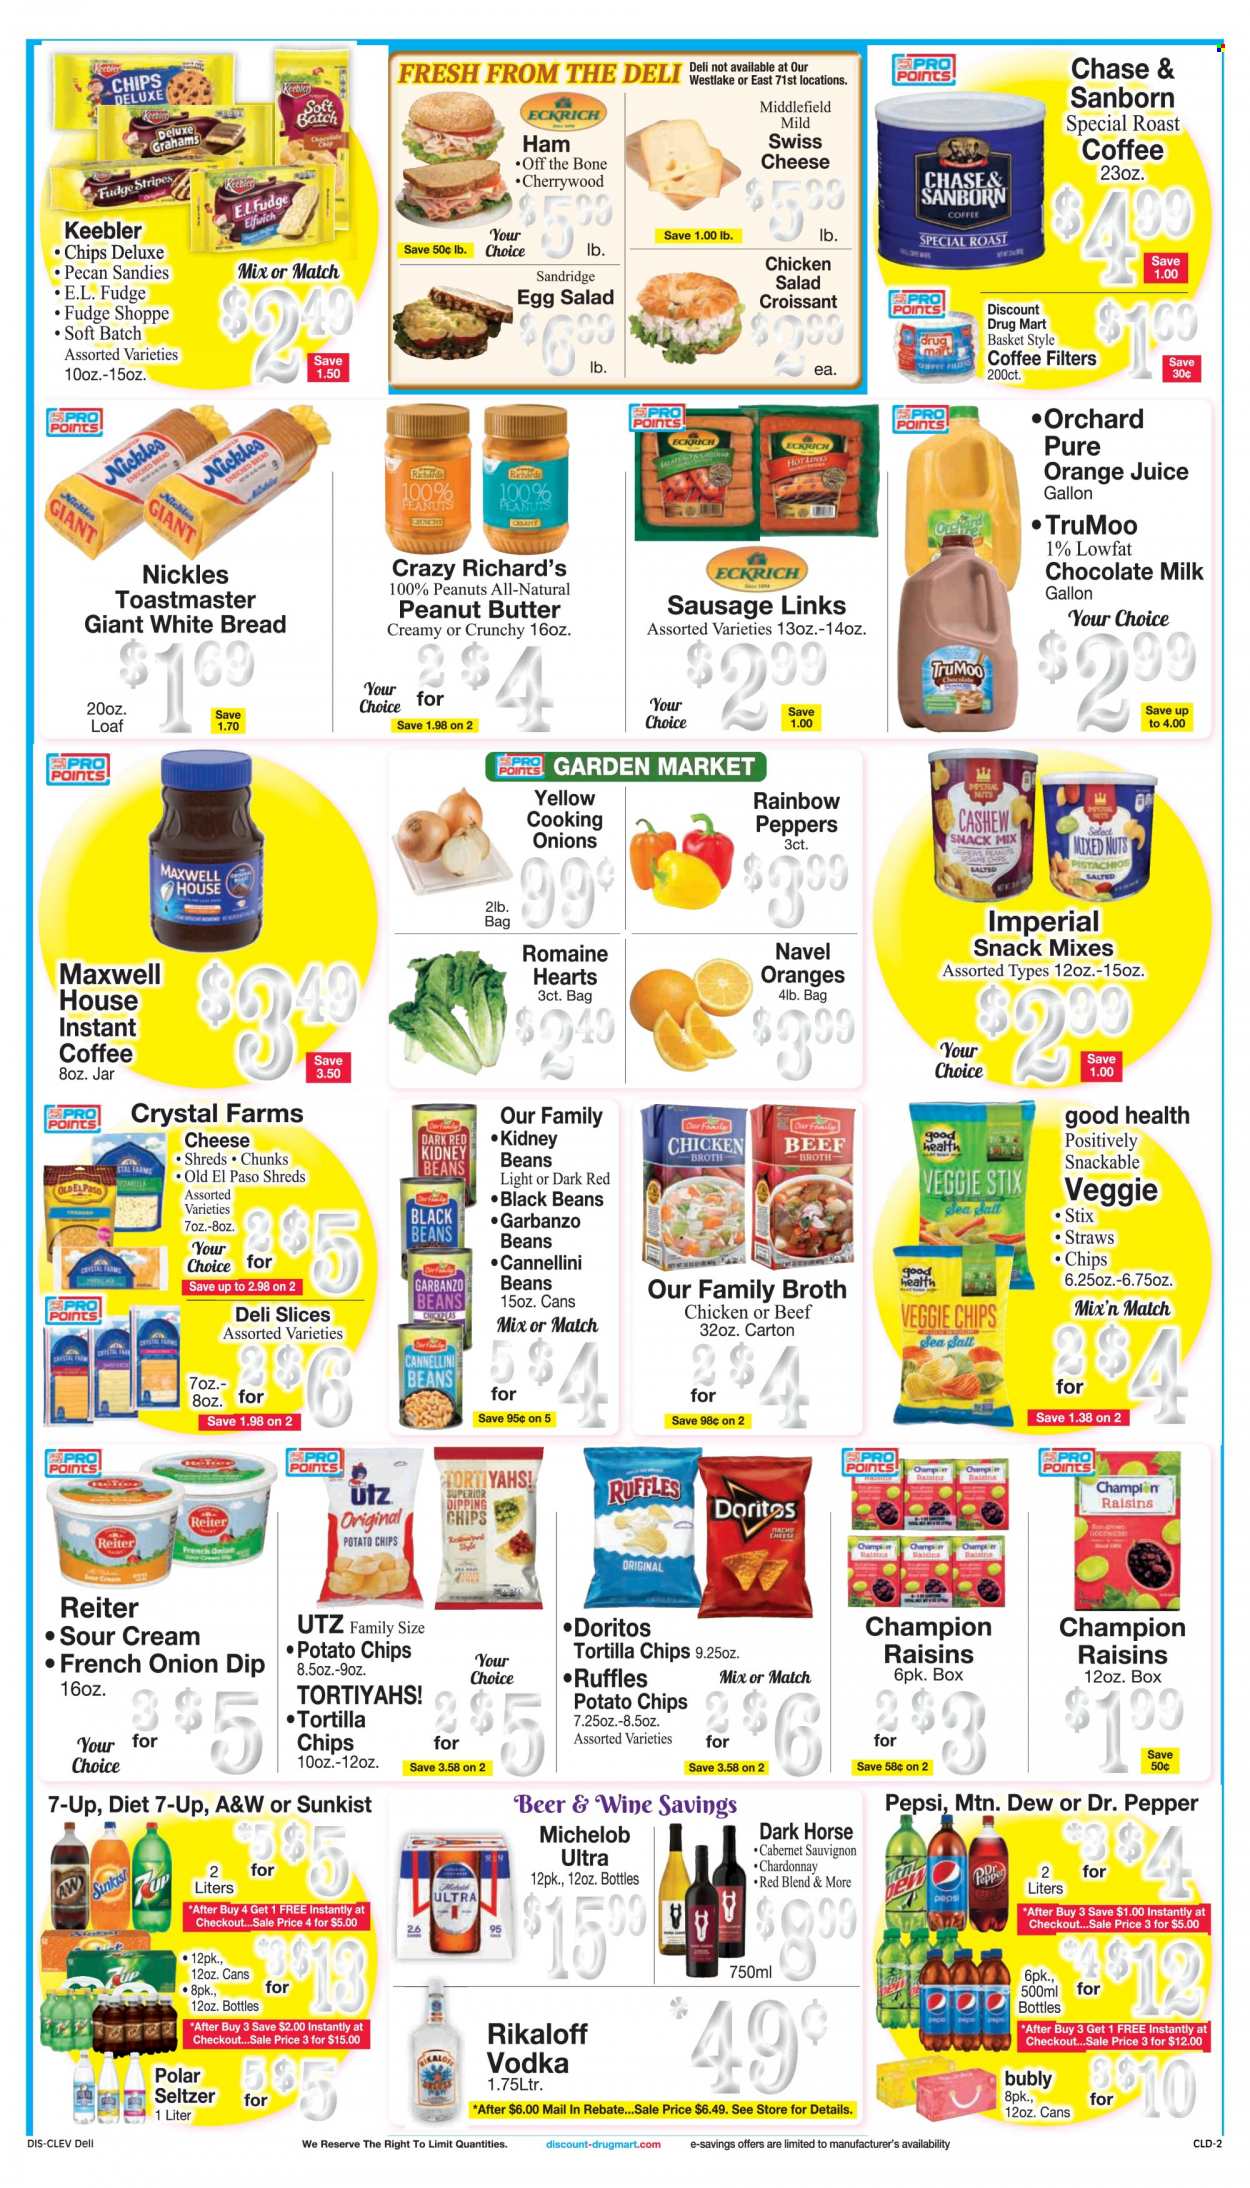 thumbnail - Discount Drug Mart Flyer - 01/19/2022 - 01/25/2022 - Sales products - bread, white bread, croissant, Old El Paso, salad, ham, ham off the bone, sausage, chicken salad, swiss cheese, milk, eggs, sour cream, dip, fudge, milk chocolate, snack, Keebler, Doritos, tortilla chips, potato chips, chips, Ruffles, beef broth, broth, black beans, cannellini beans, kidney beans, chickpeas, peanut butter, raisins, peanuts, dried fruit, pistachios, mixed nuts, Mountain Dew, Pepsi, orange juice, juice, Dr. Pepper, 7UP, A&W, seltzer water, Maxwell House, instant coffee, Cabernet Sauvignon, red wine, white wine, Chardonnay, wine, vodka, beer, basket, straw, Michelob. Page 2.